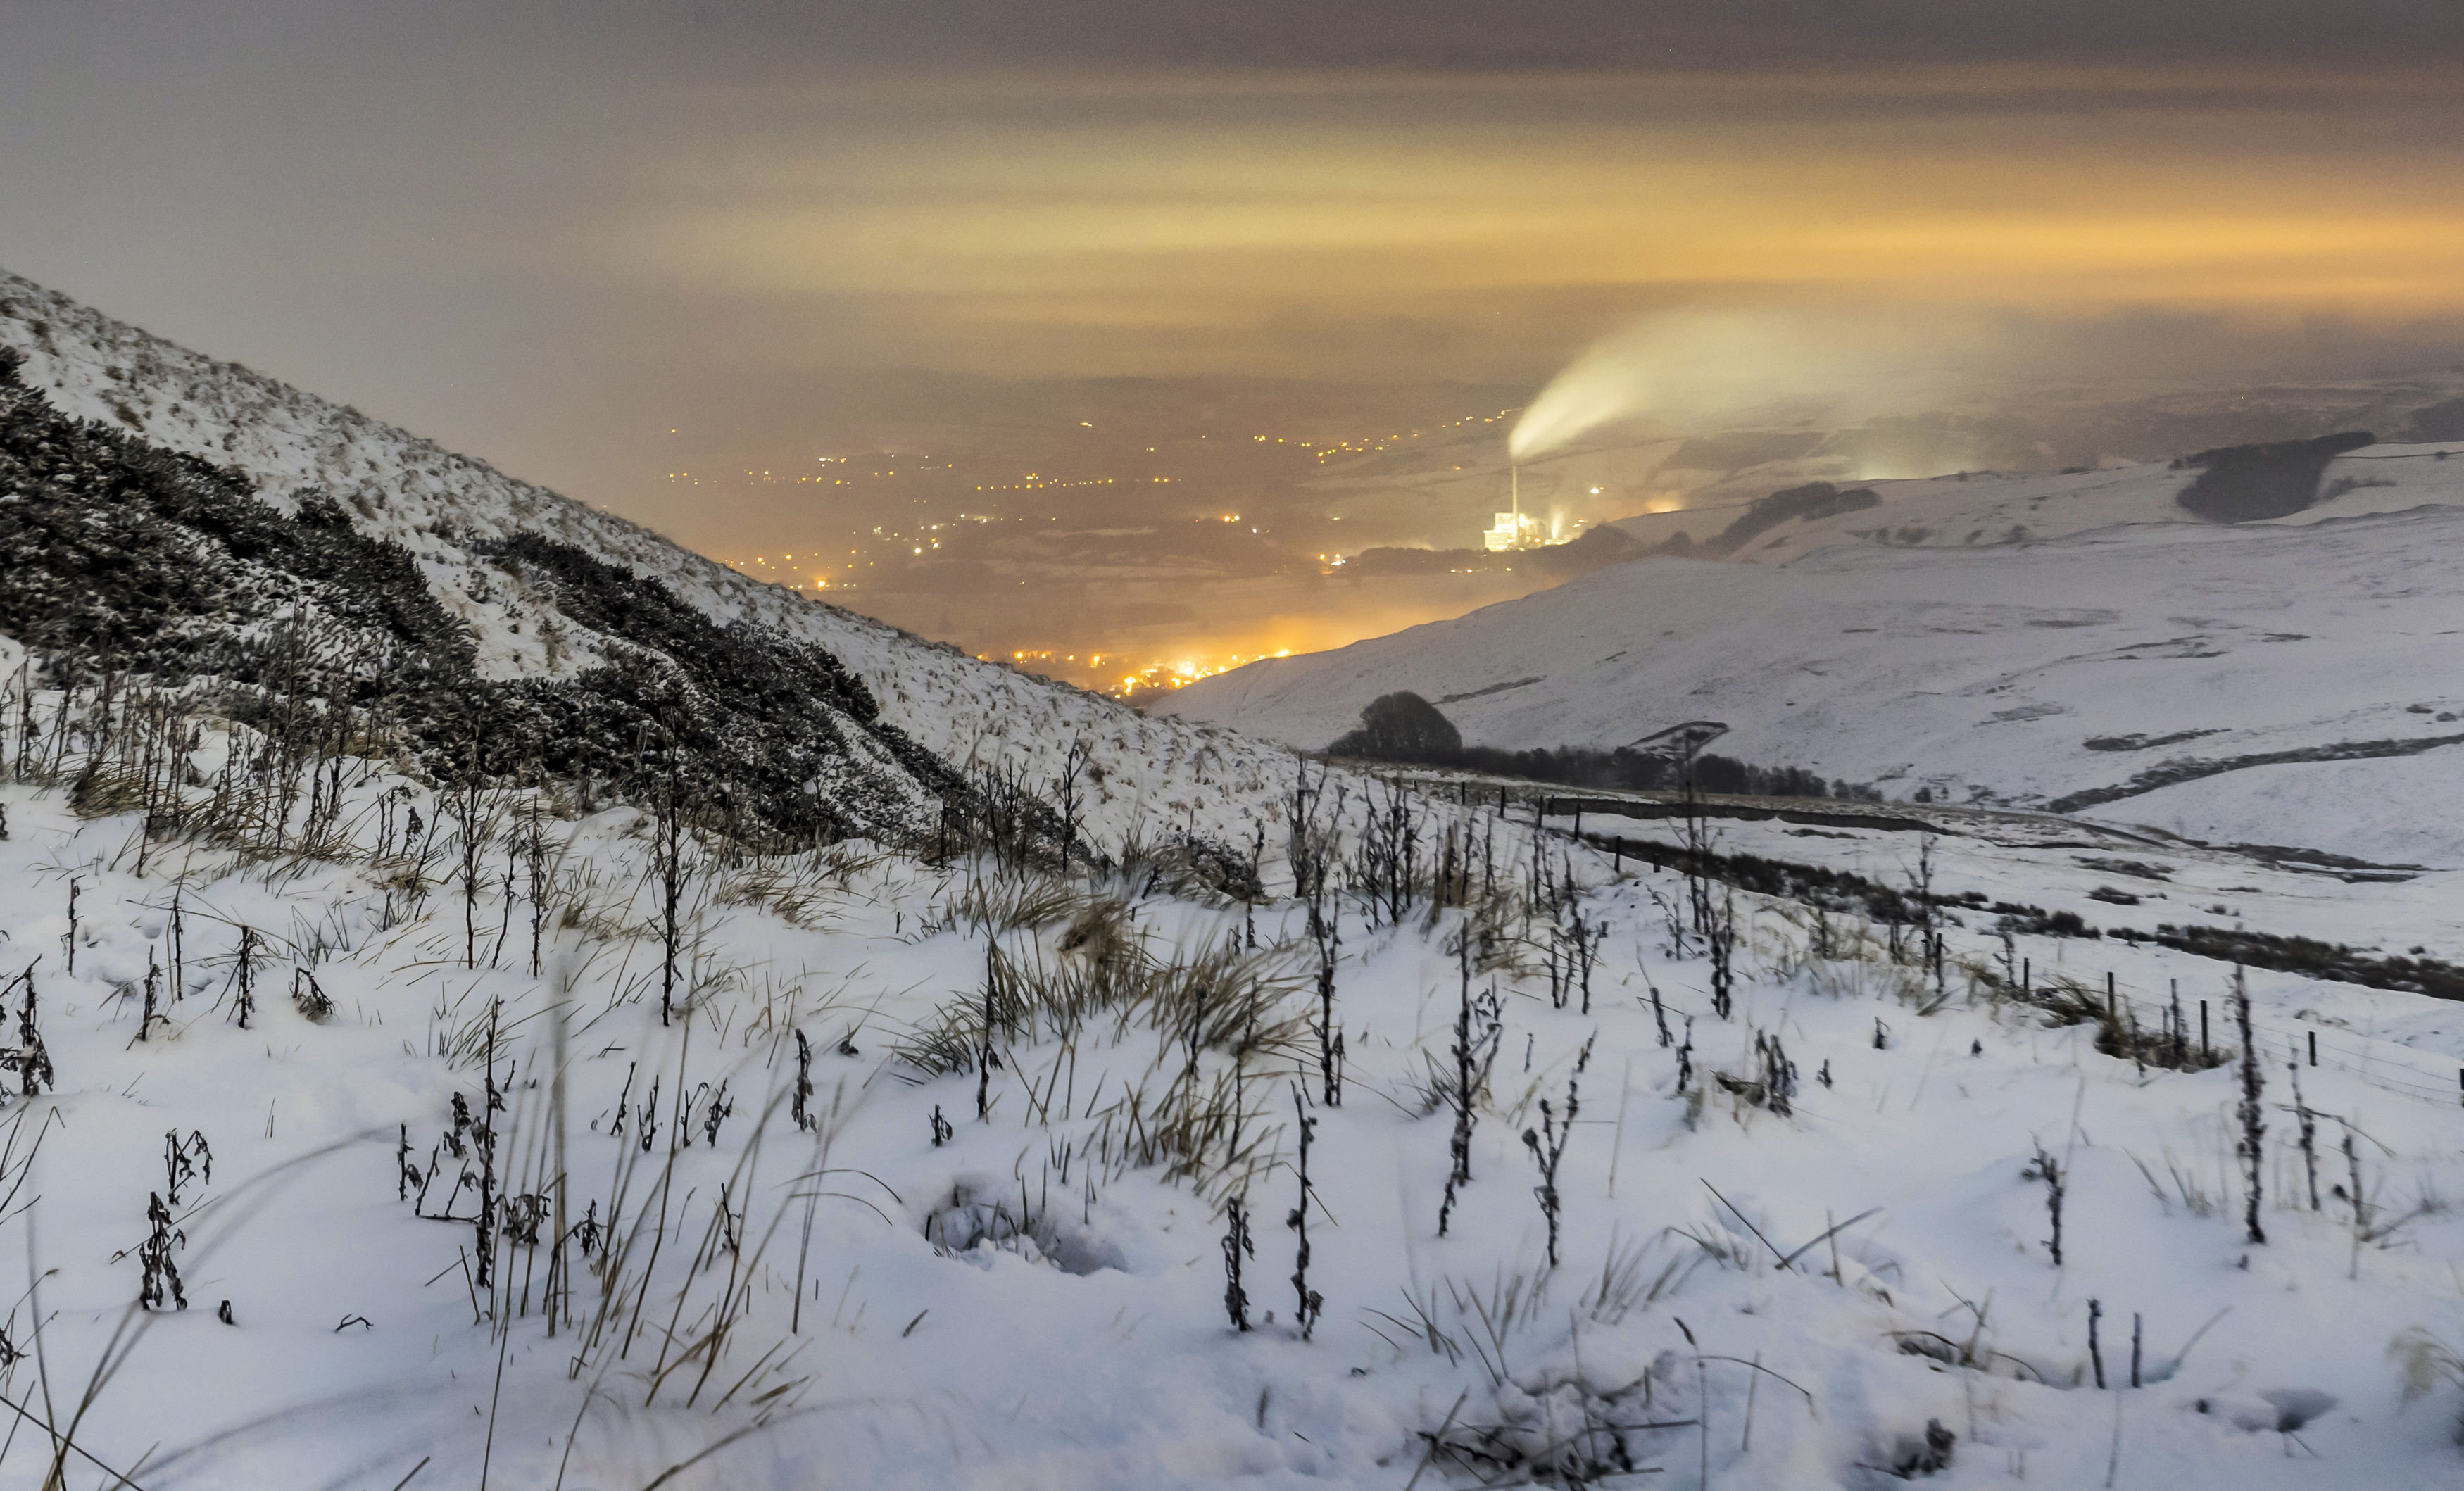 <strong>Snow covers Hope Valley in the Peak District&nbsp;at sunrise on Sunday morning</strong>